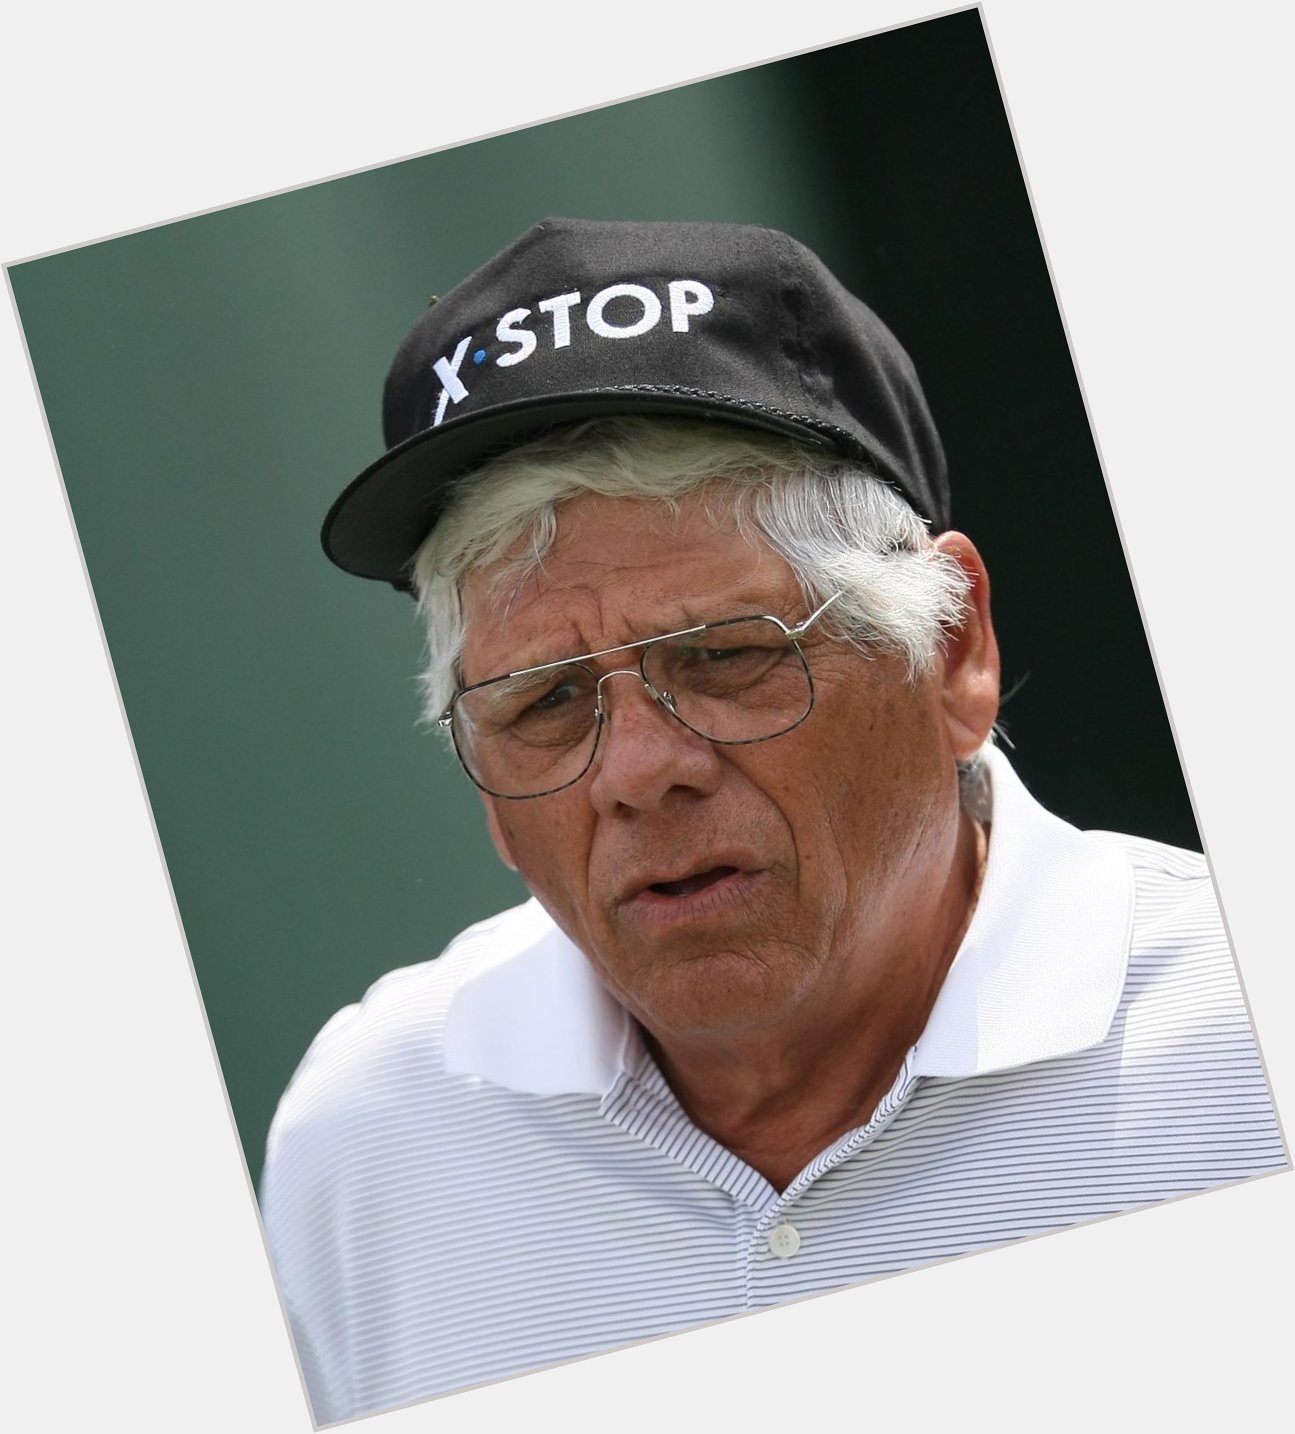 Lee Trevino turns 75 today. Happy birthday to a true legend of the game! 